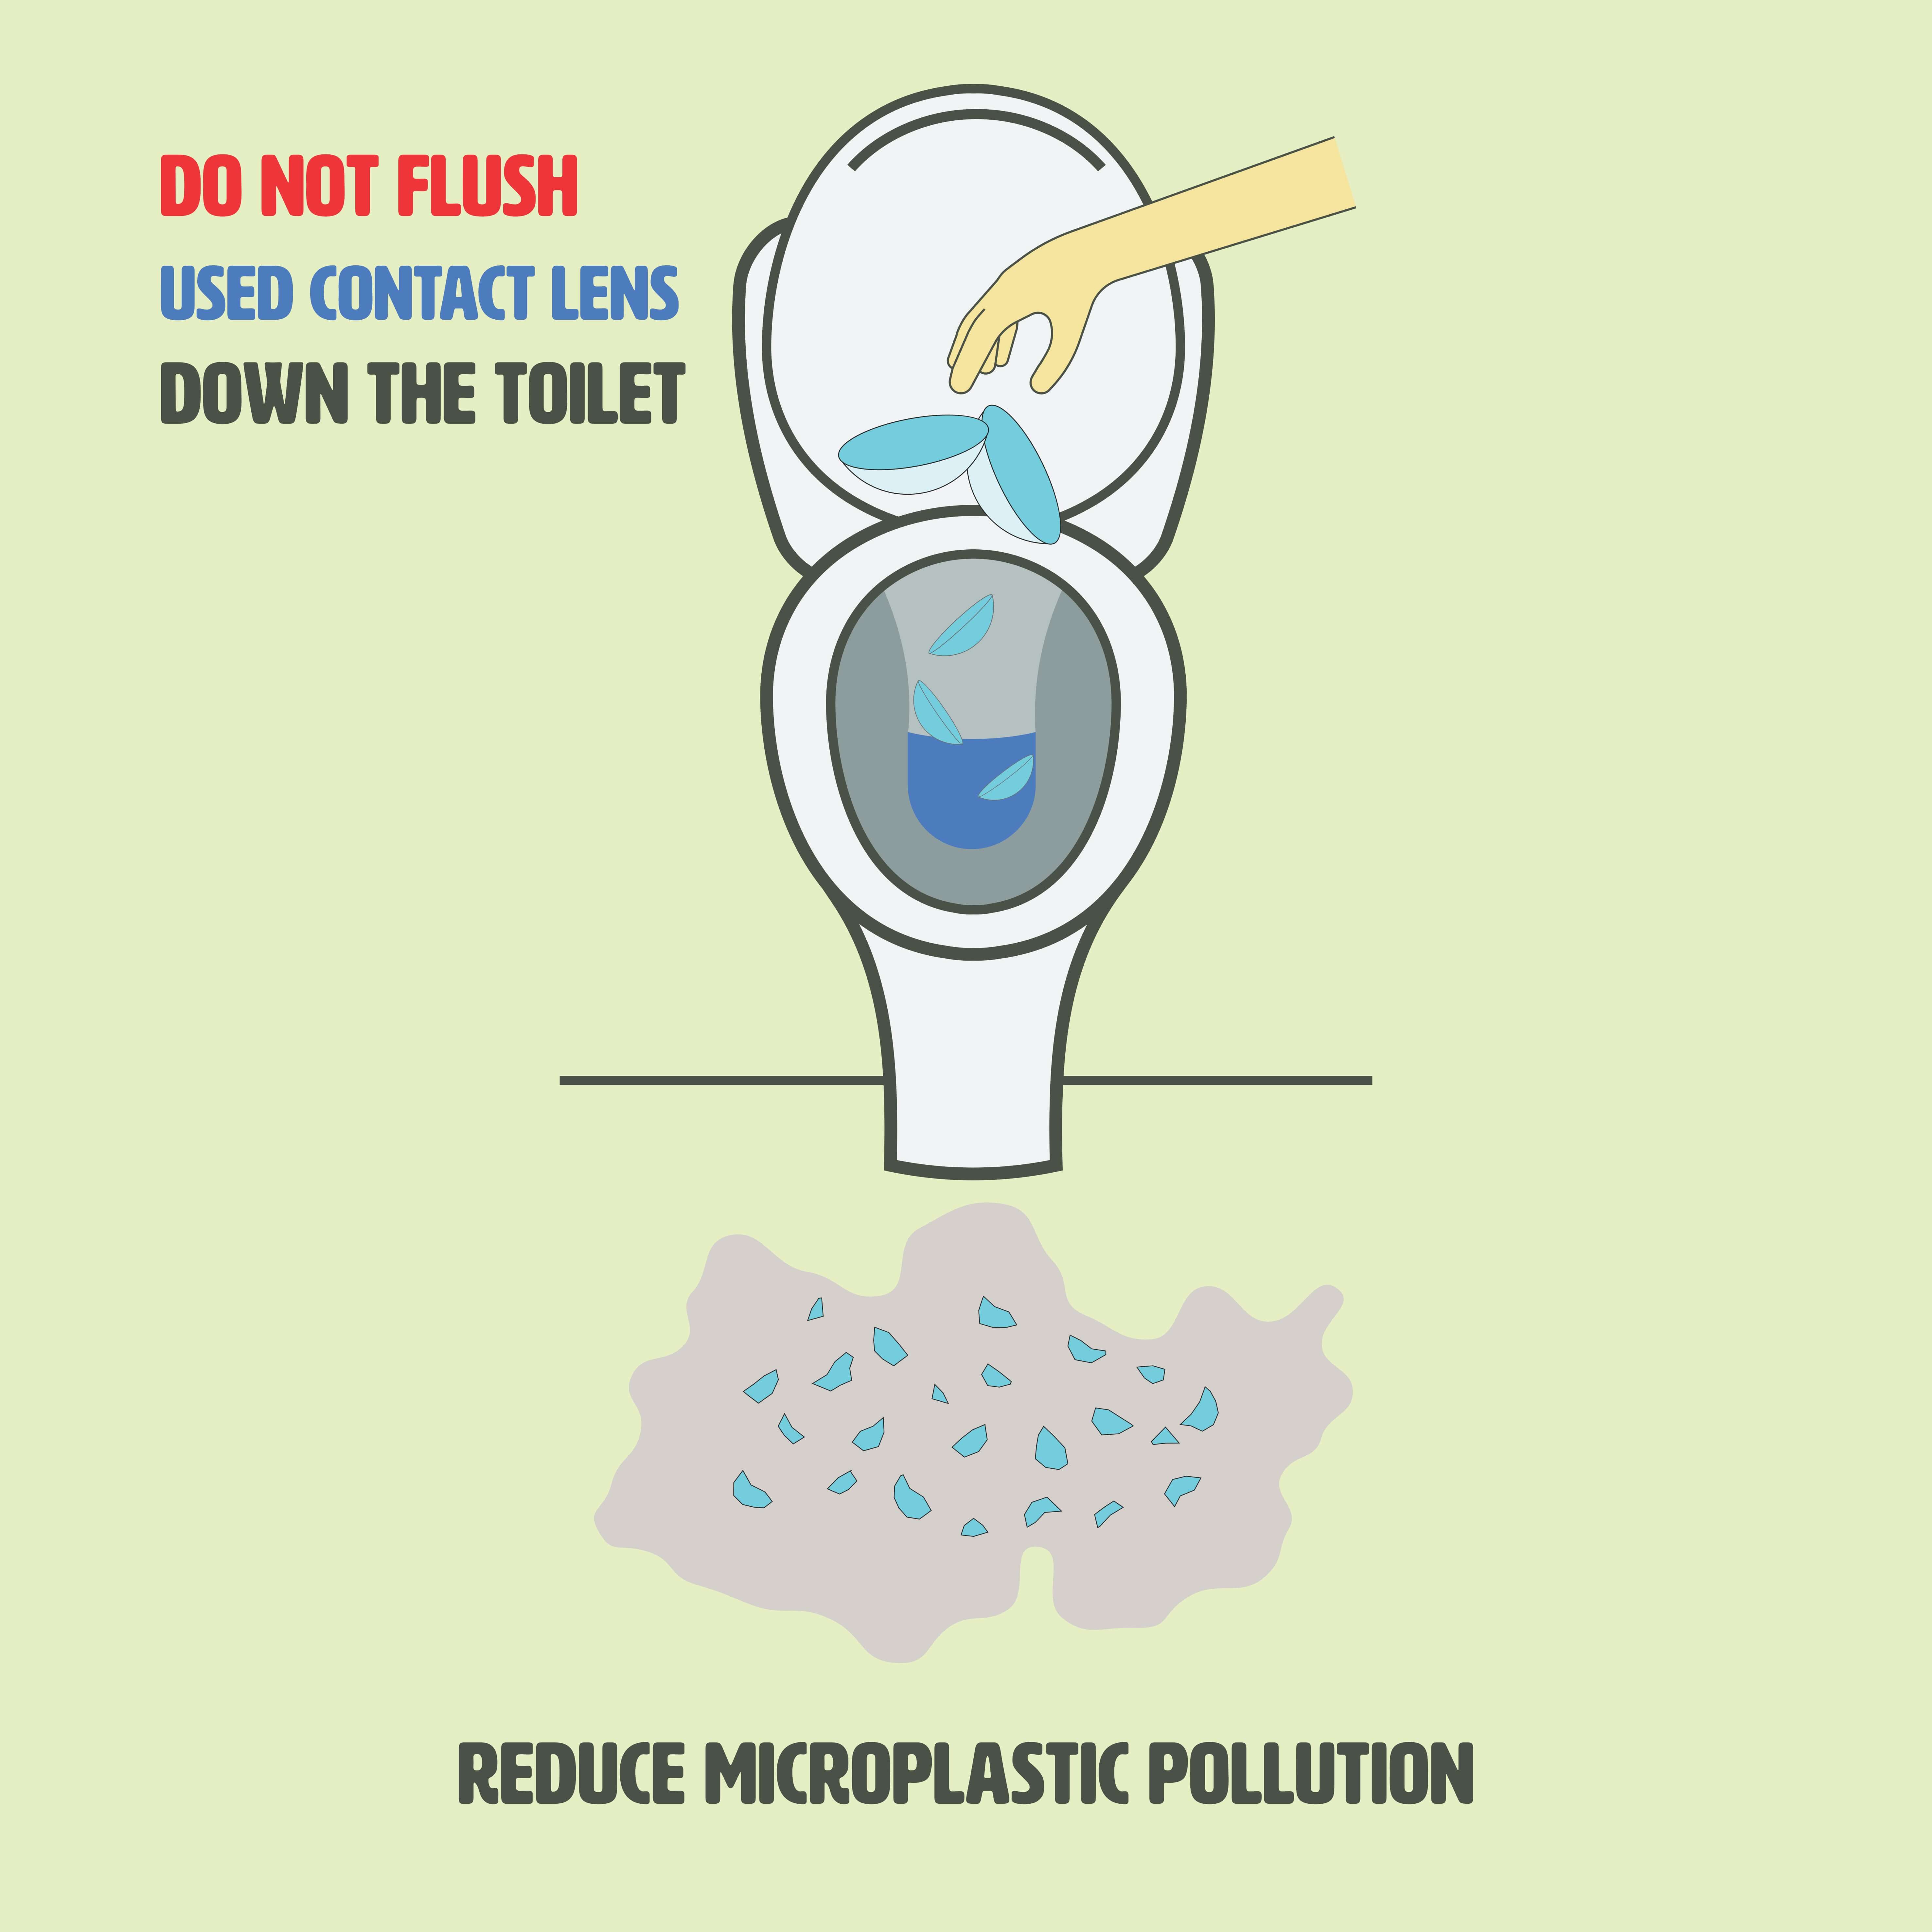 Graphic of hand flushing contact lenses in toilet